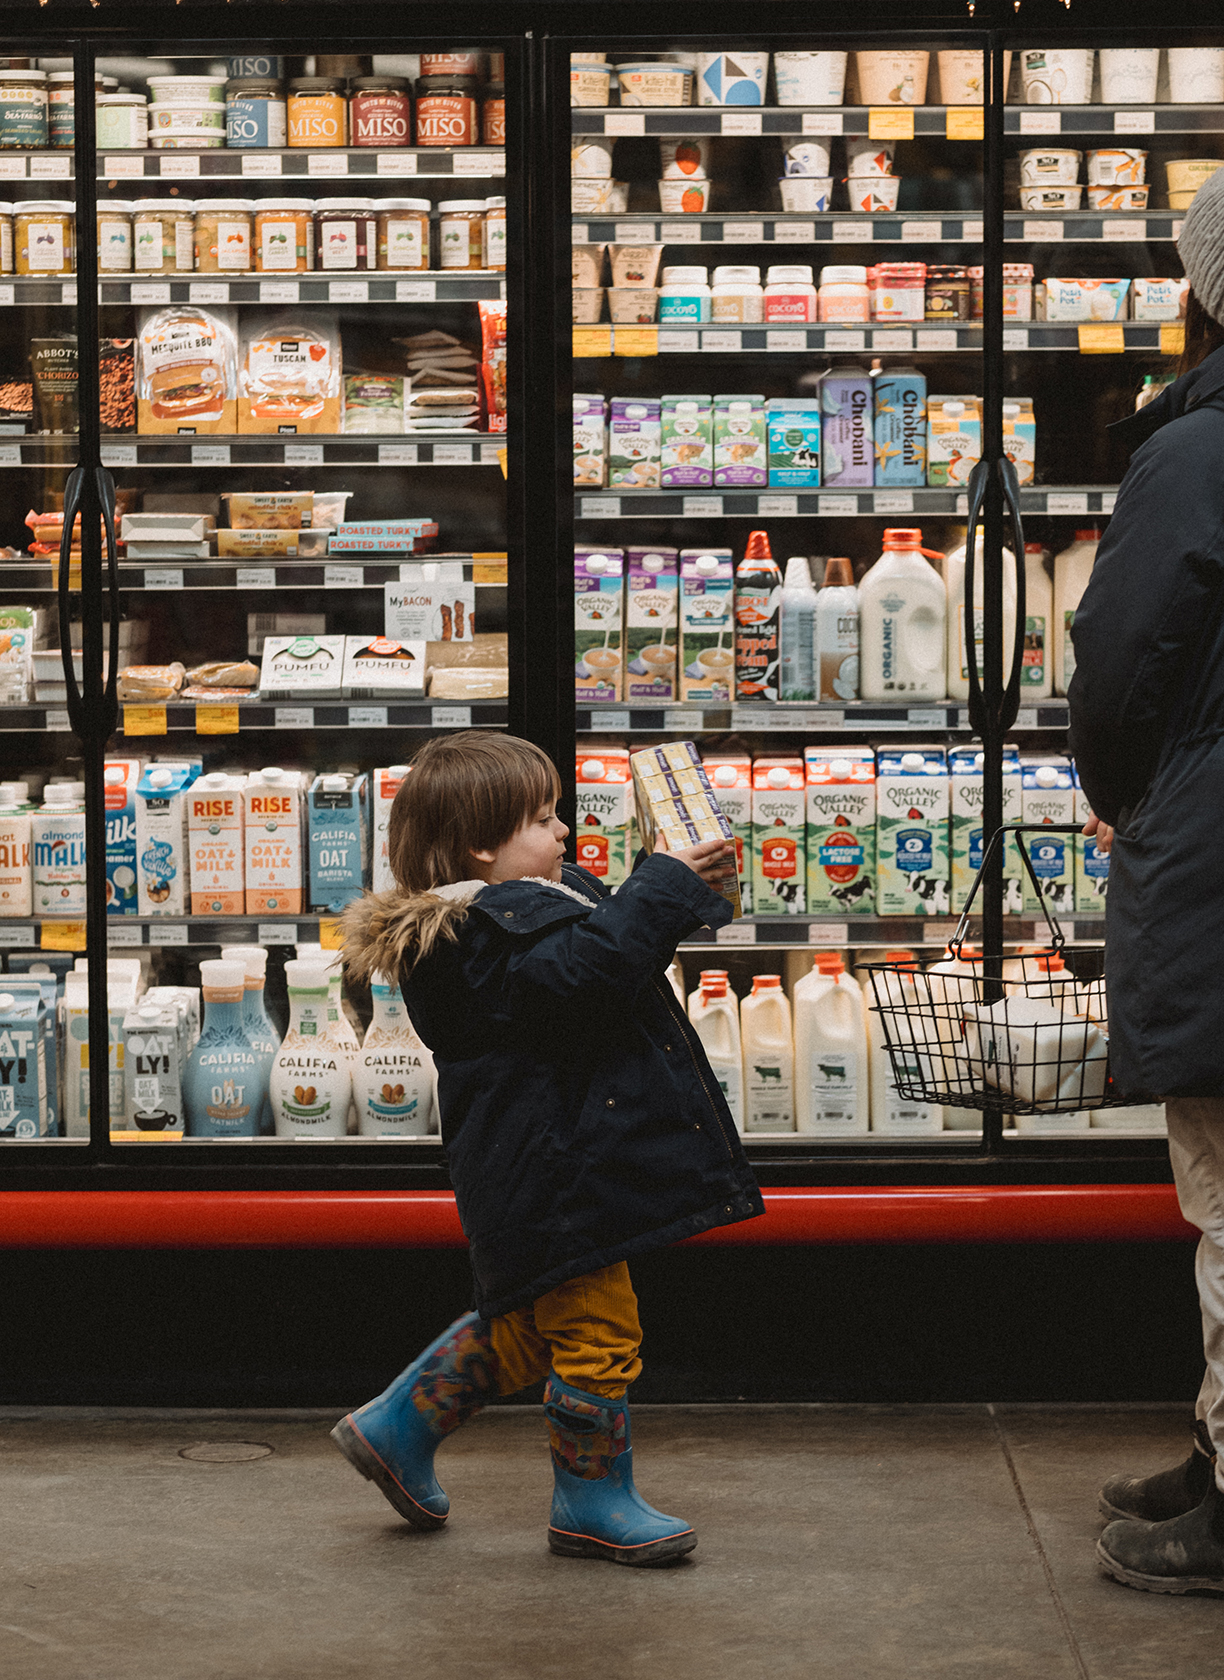 focus on a child trailing behind their mother in front of the dairy case holding a package of juice boxes